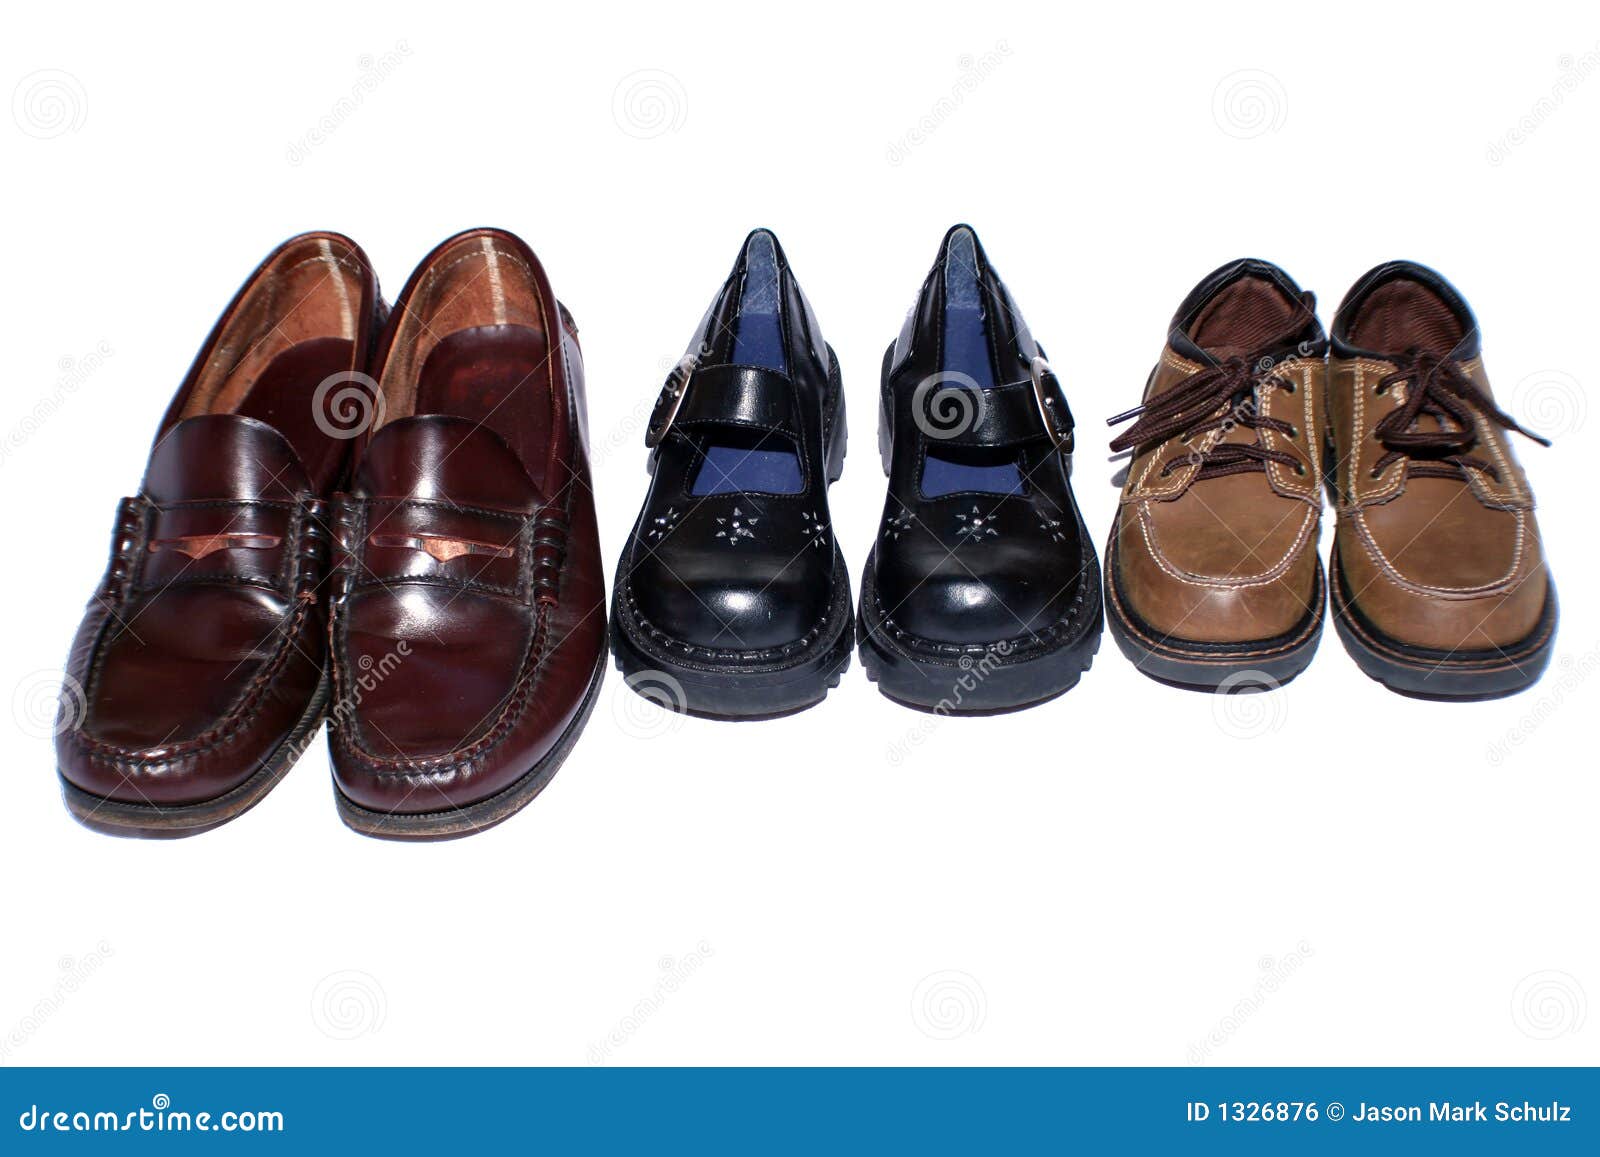 Adult and Children Shoes stock photo. Image of feet, laces - 1326876